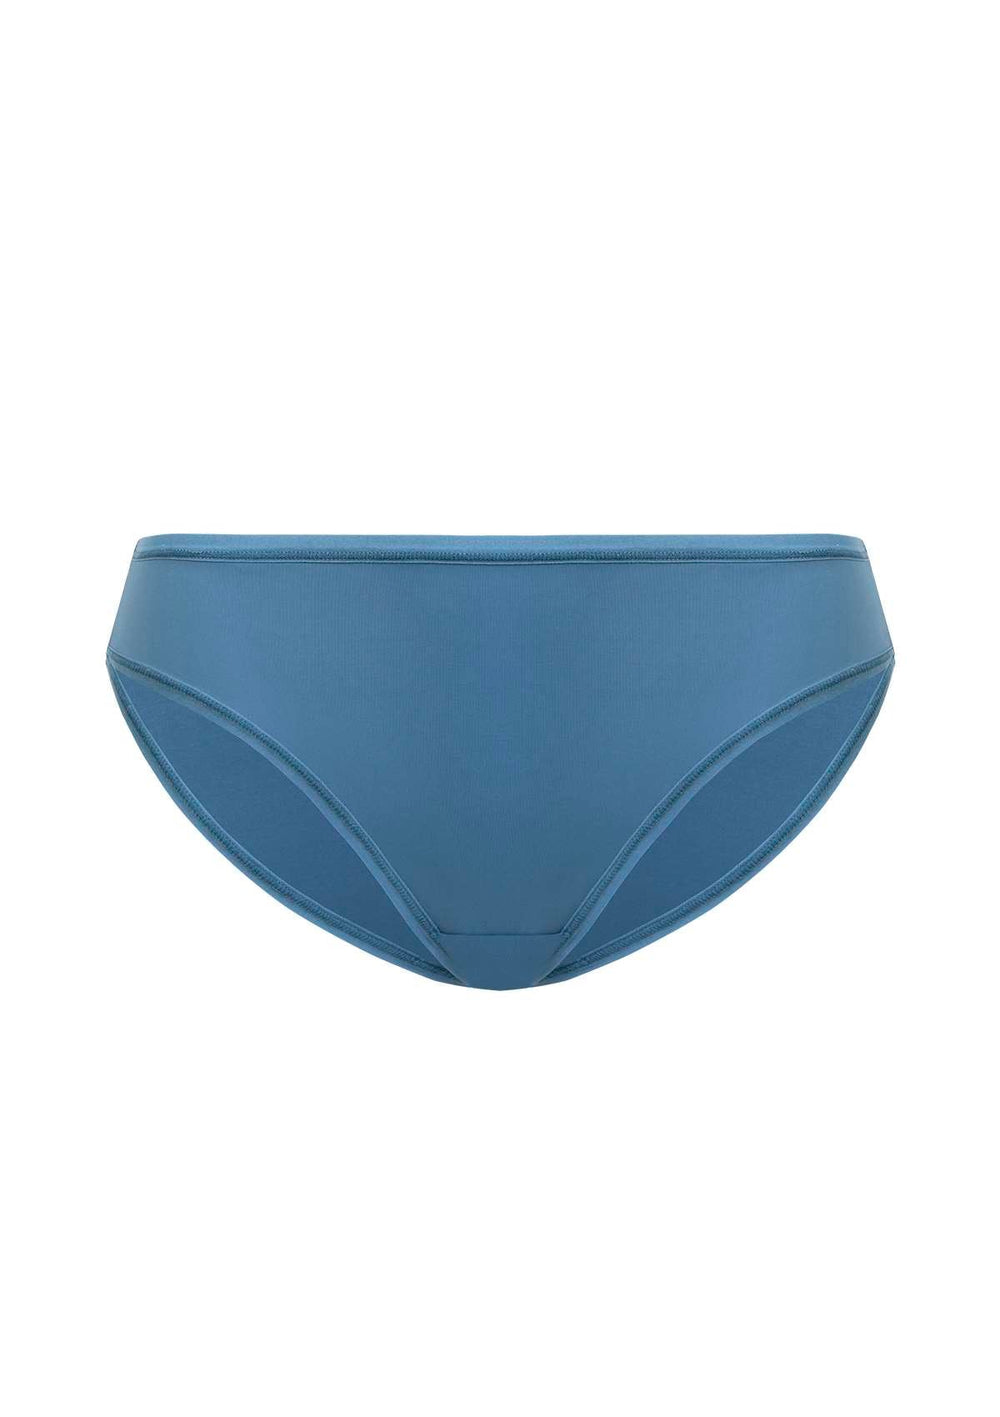 Sky Blue Pan/iv/003 Cotton Hipster Panties For Ladies, Printed Pattern,  Supreme Quality, Contemporary Design, Splendid Look, Soft Texture, Skin  Friendly, Comfortable To Wear, Breathable Fabric, Inner Wear at Best Price  in Kolkata